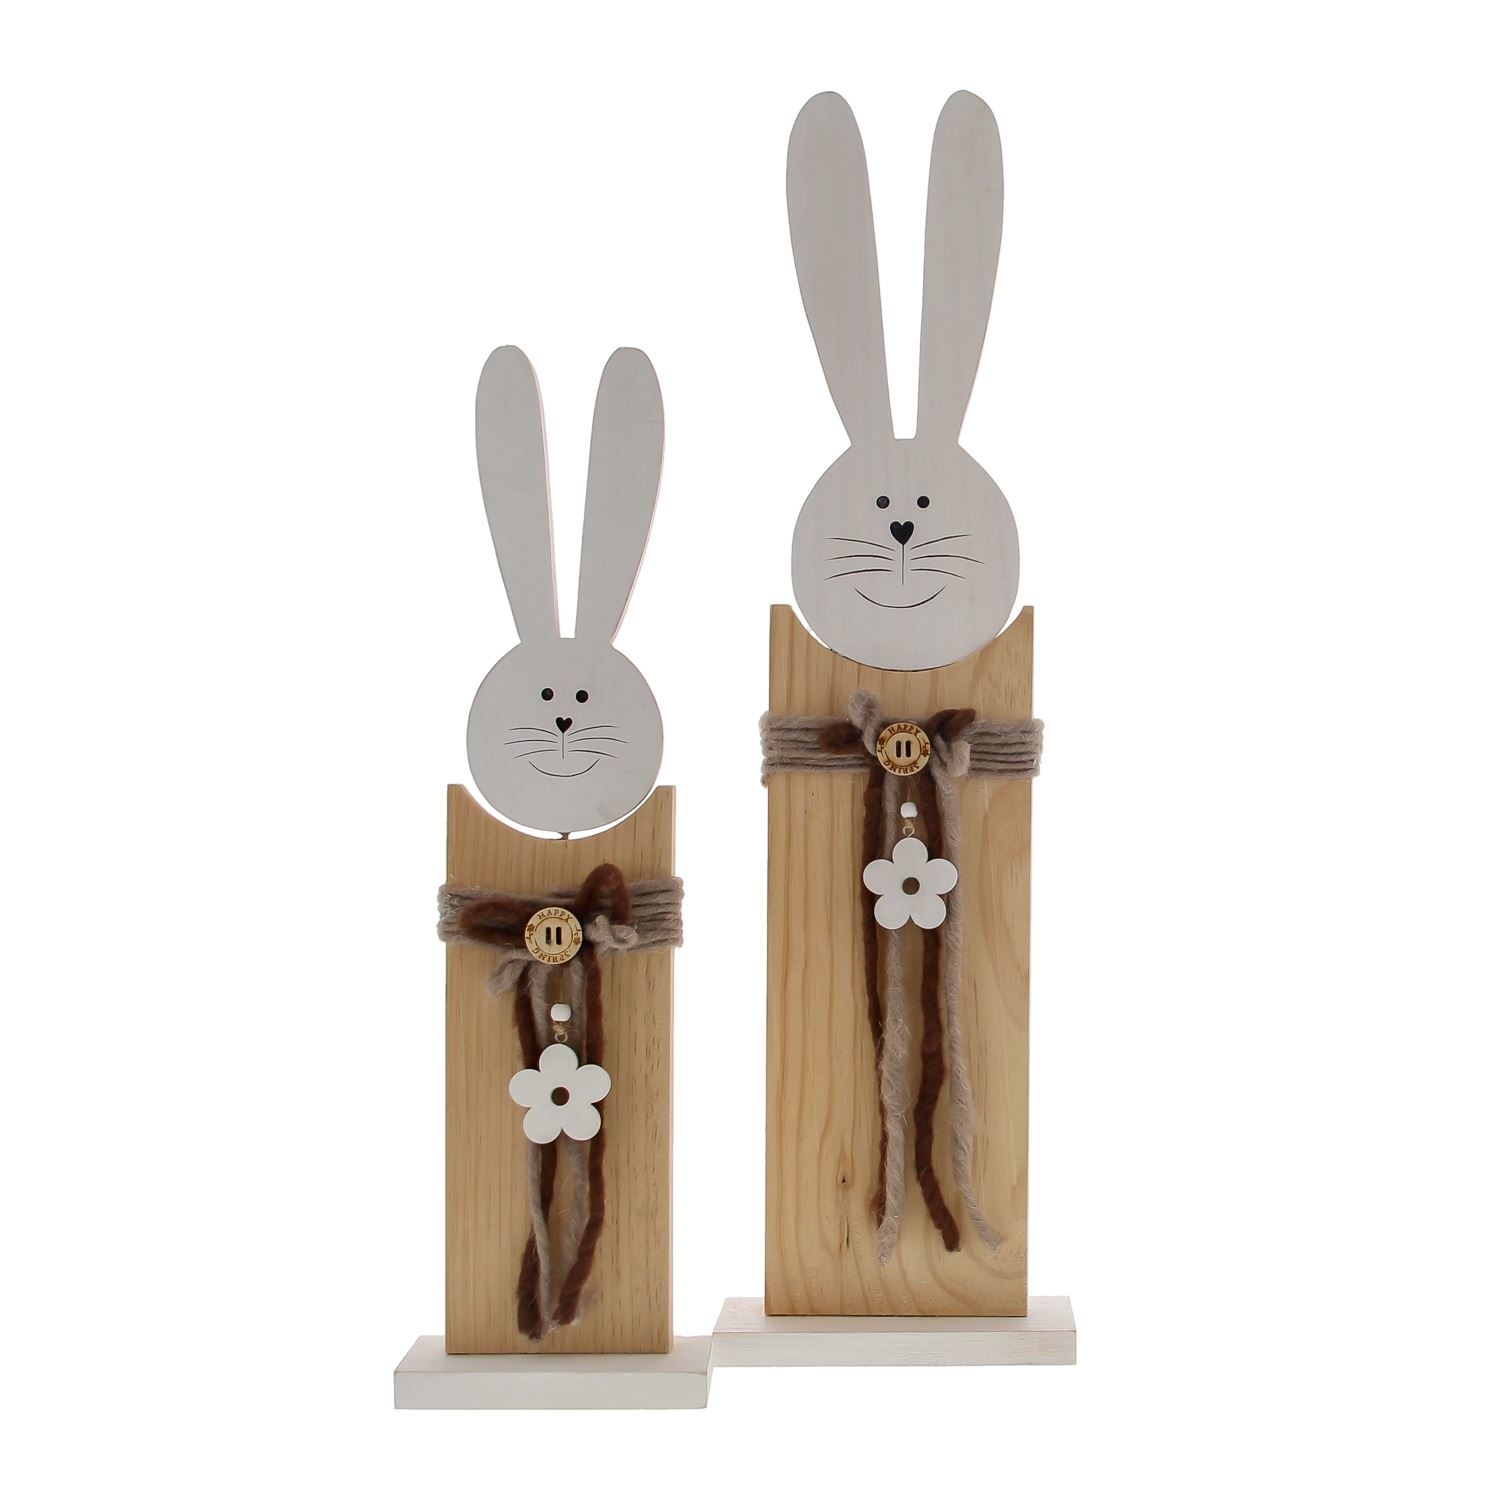 Wooden decoration rabbits "Woody" small and large- 200*80*710 mm